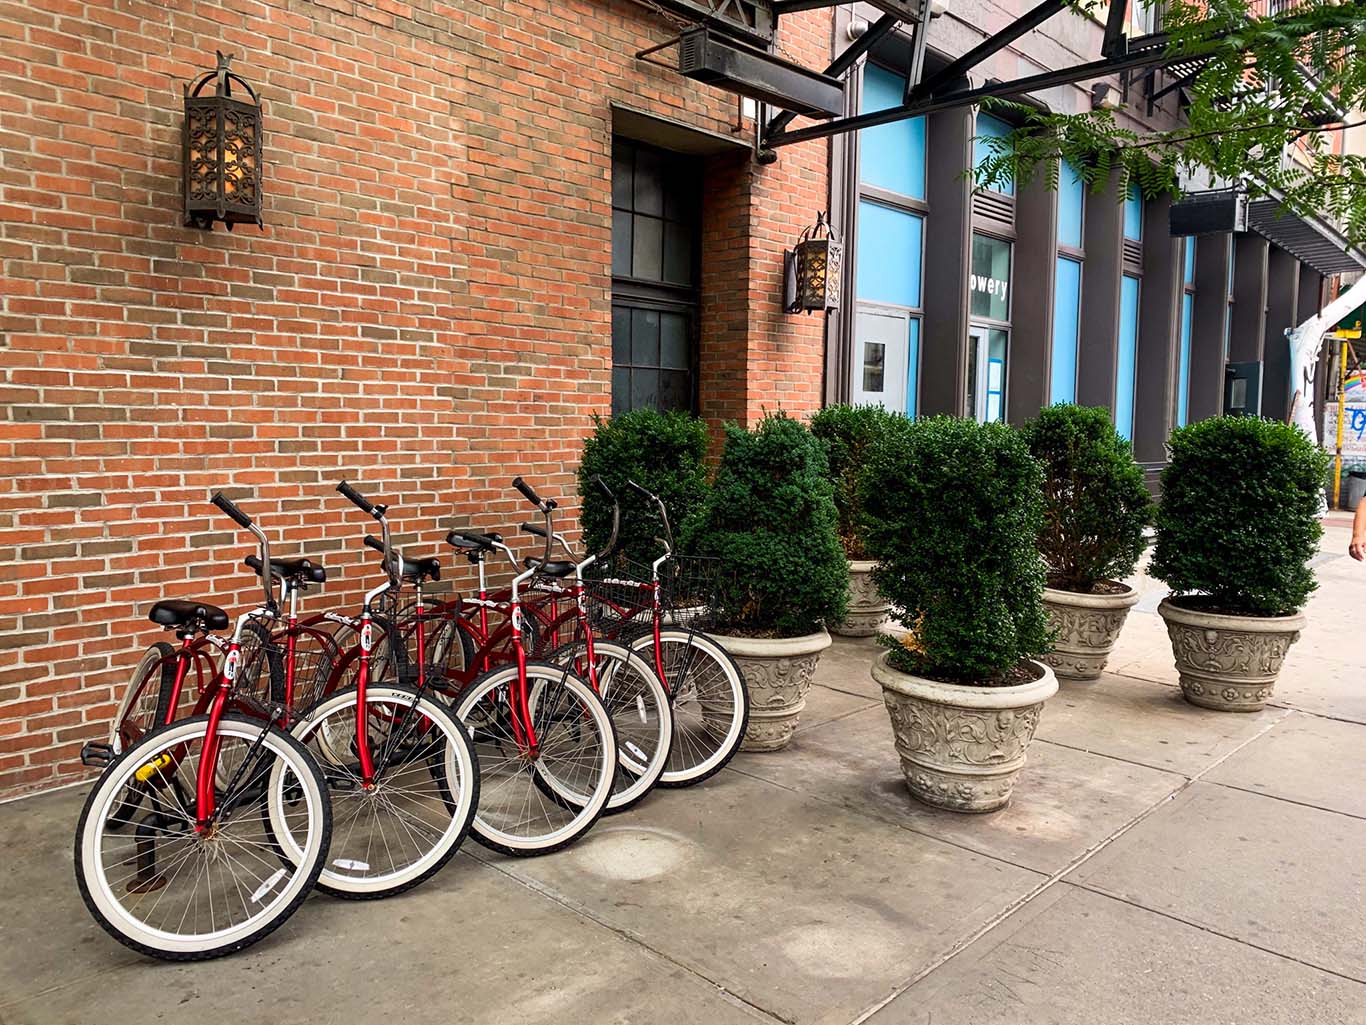 The Bowery Hotel Make sure to grab a cruiser (free to guests) and explore the neighborhood